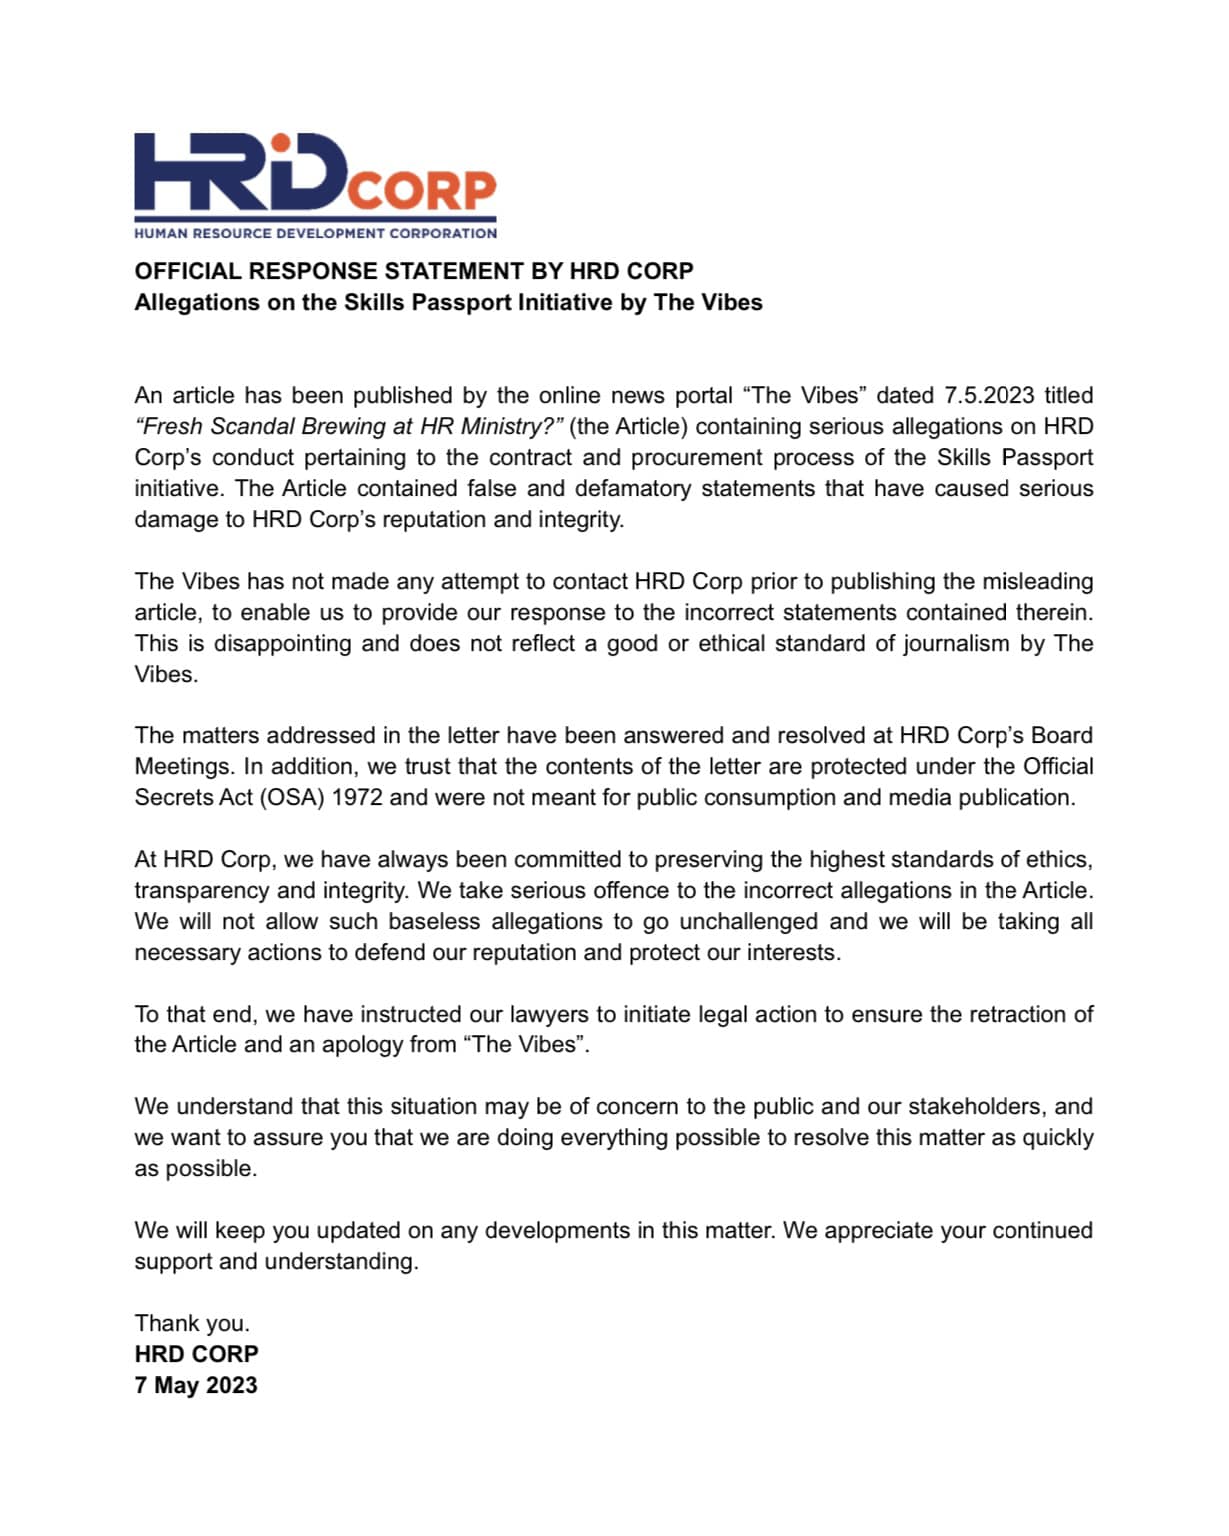 Statement from hrd corp